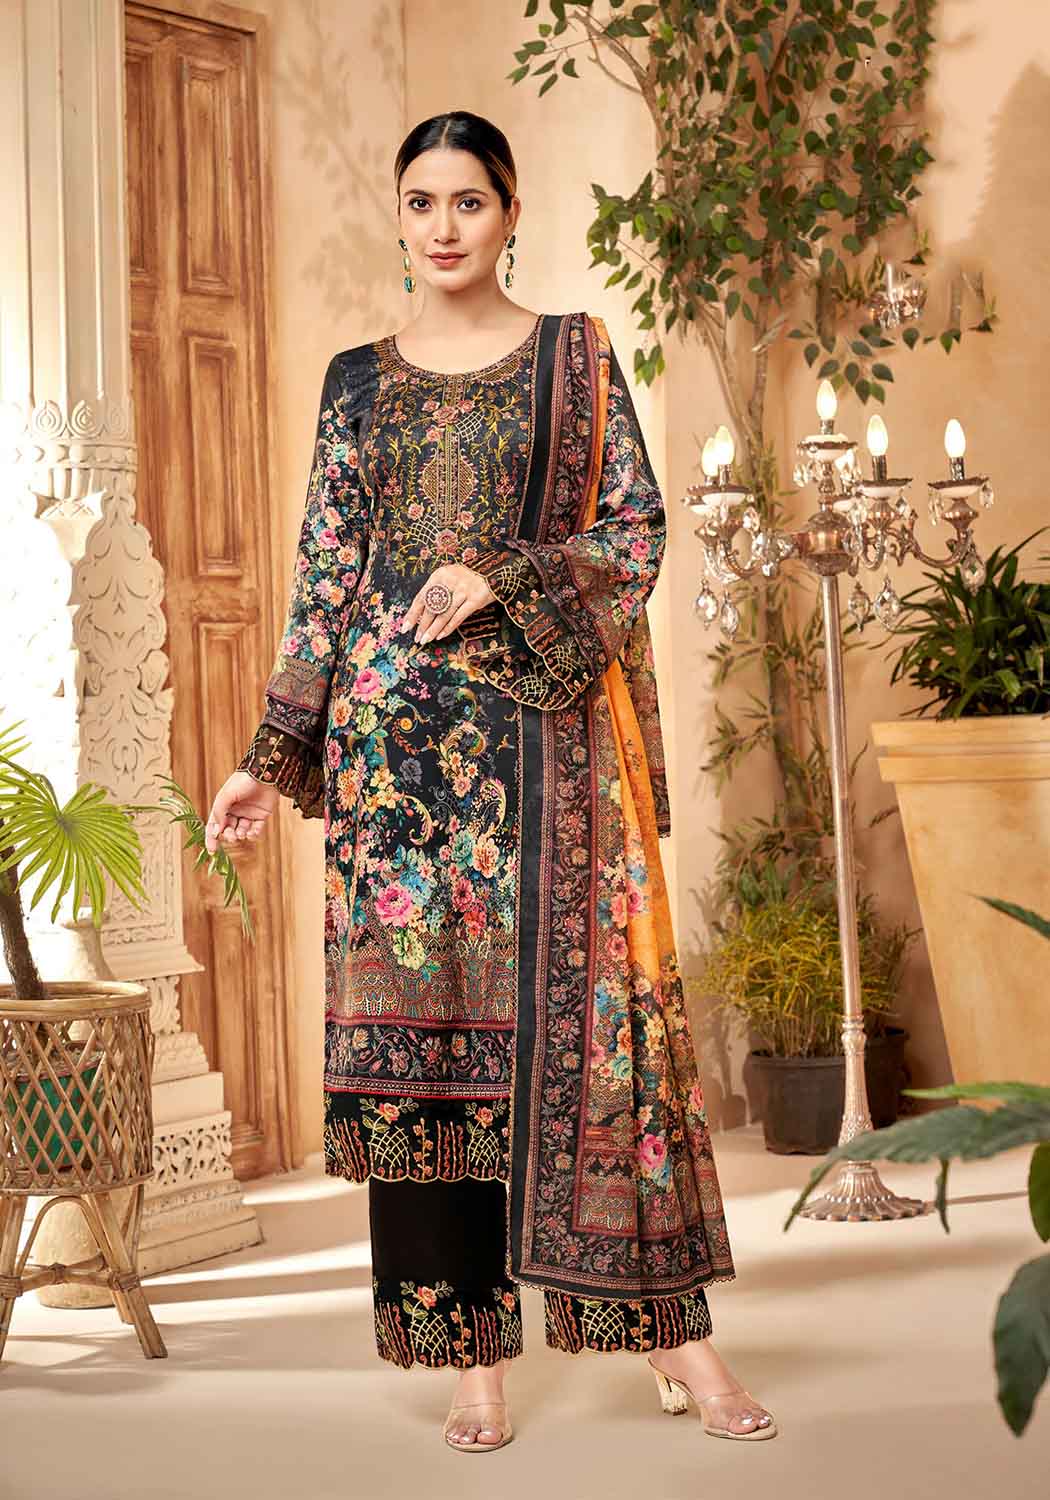 Unstitched Pakistani Print Cotton Suit Material with Embroidery Black